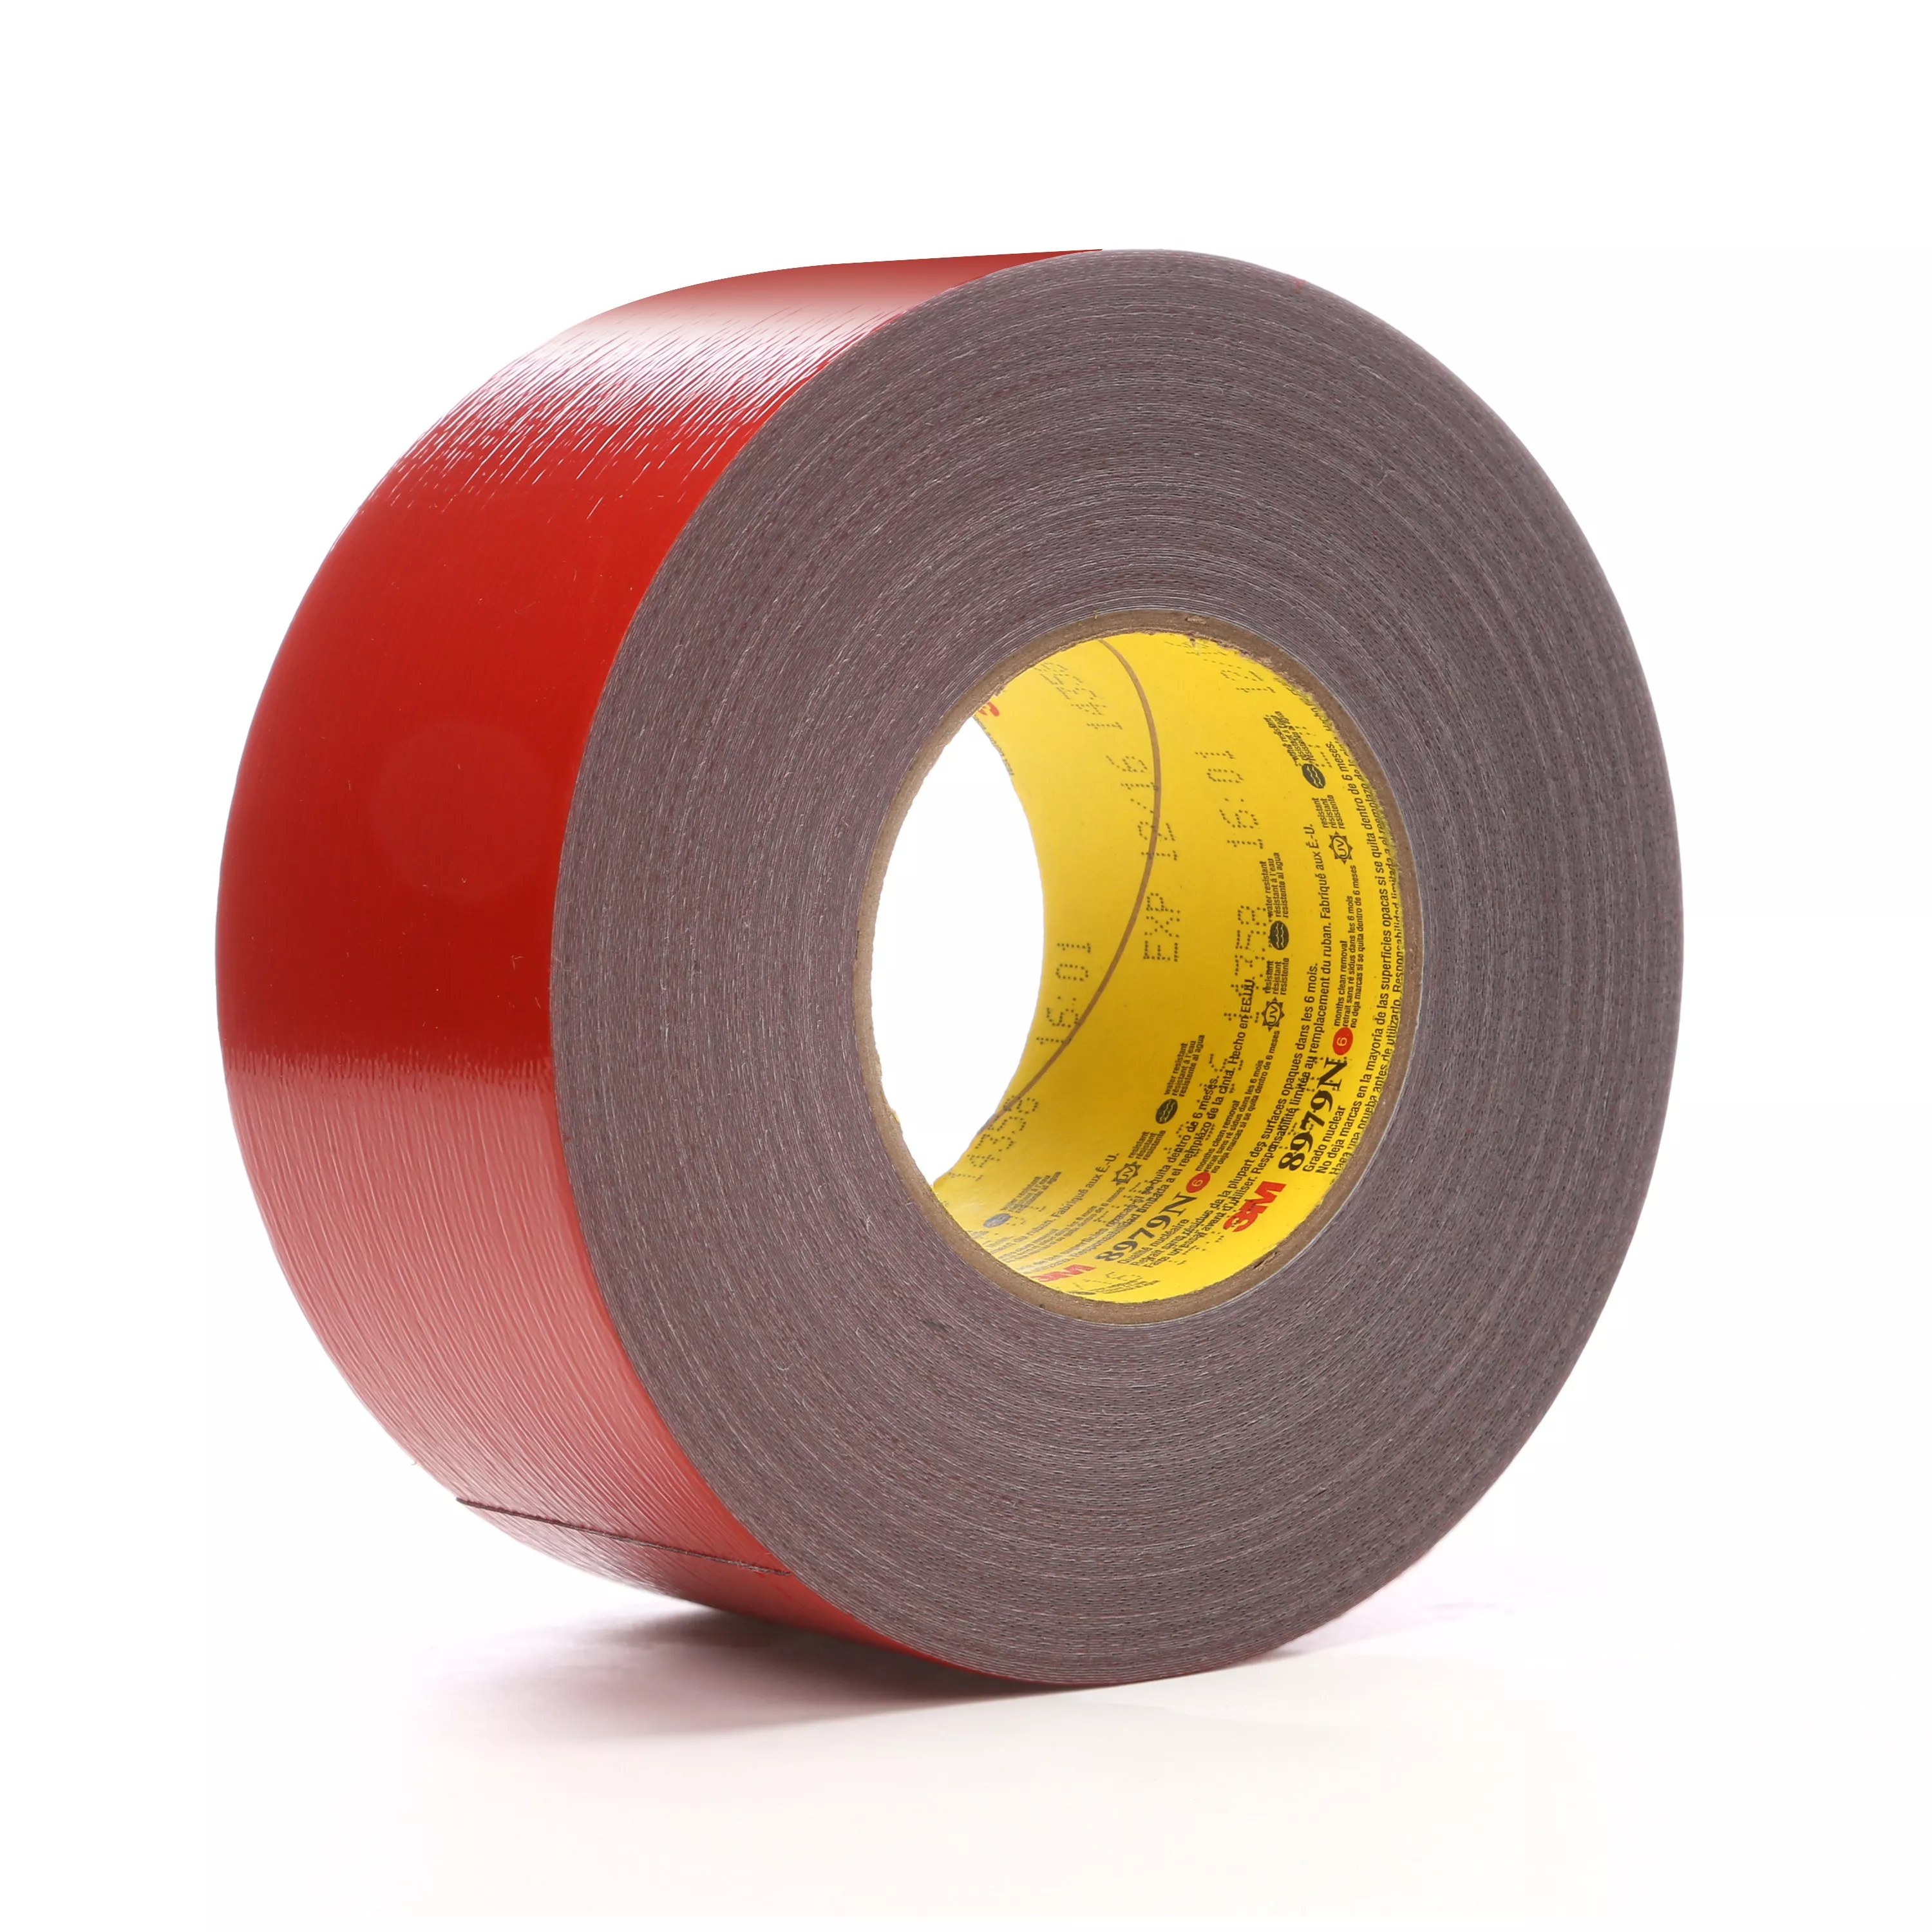 3M™ Performance Plus Duct Tape 8979N, (Nuclear), Red, 72 mm x 54.8 m,
12.1 mil, 12/Case